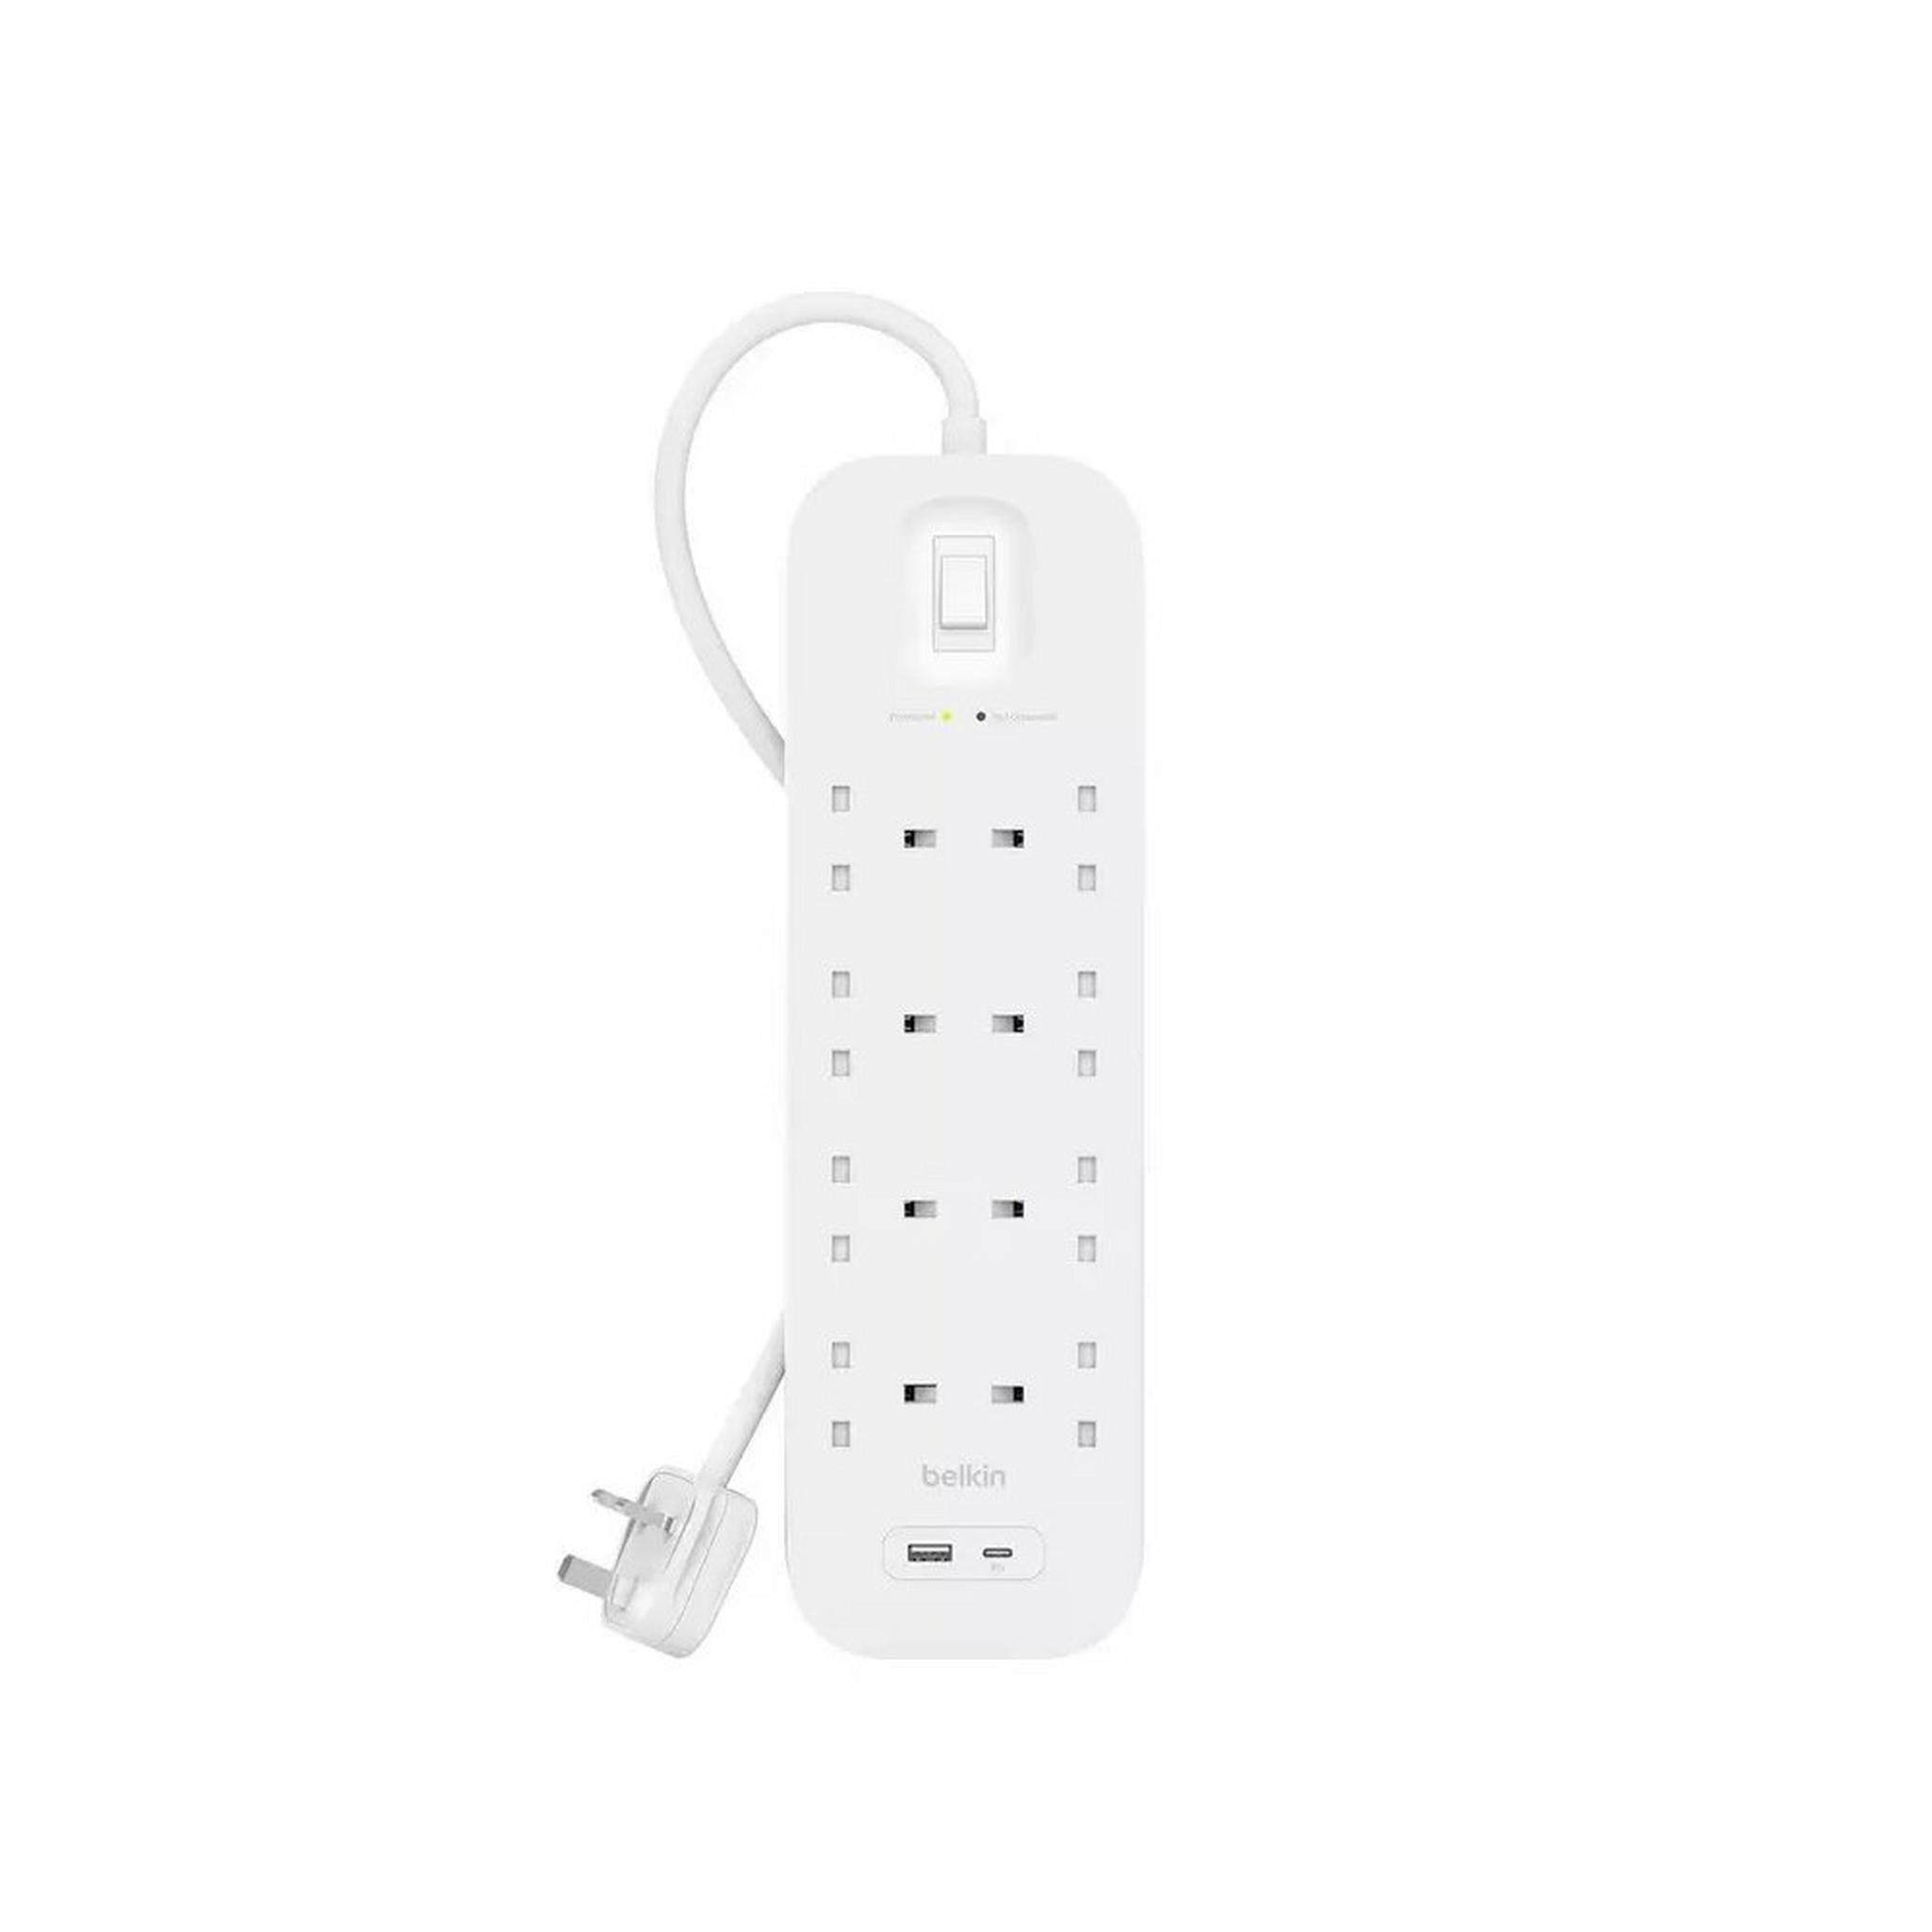 Belkin Surge Protector Power Extension with 8 Outlets & USB Charging, 2m, SRB003AR2M - White